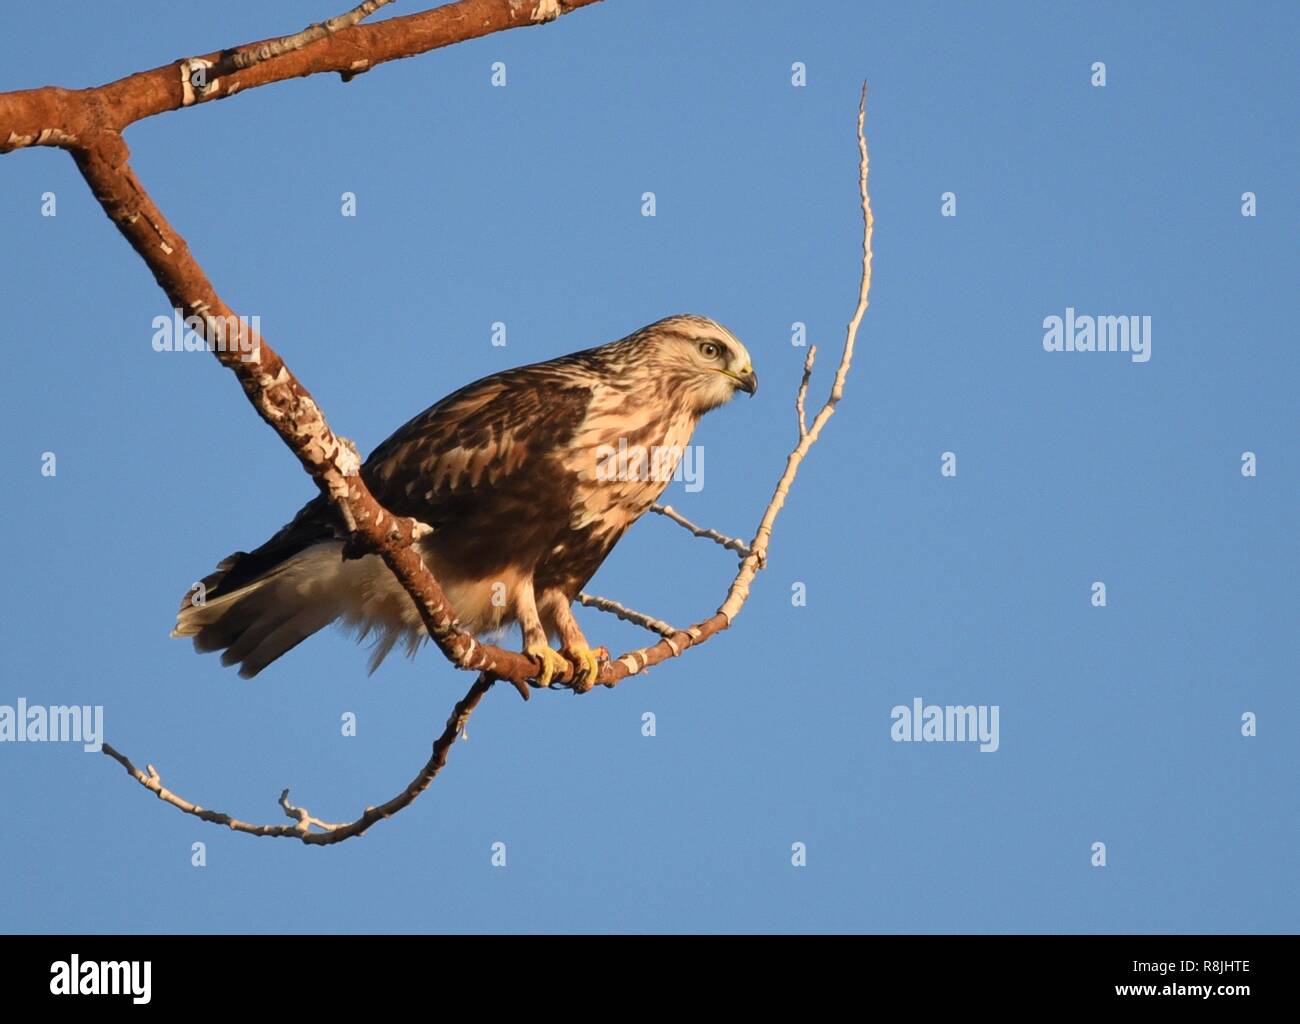 A Rough legged Hawk watches for prey from a tree branch at Seedskadee National Wildlife Refuge November 15, 2018 in Sweetwater County, Wyoming. The Rough legged Hawk overwinters in Wyoming and is well adapted to harsh frigid weather. Stock Photo